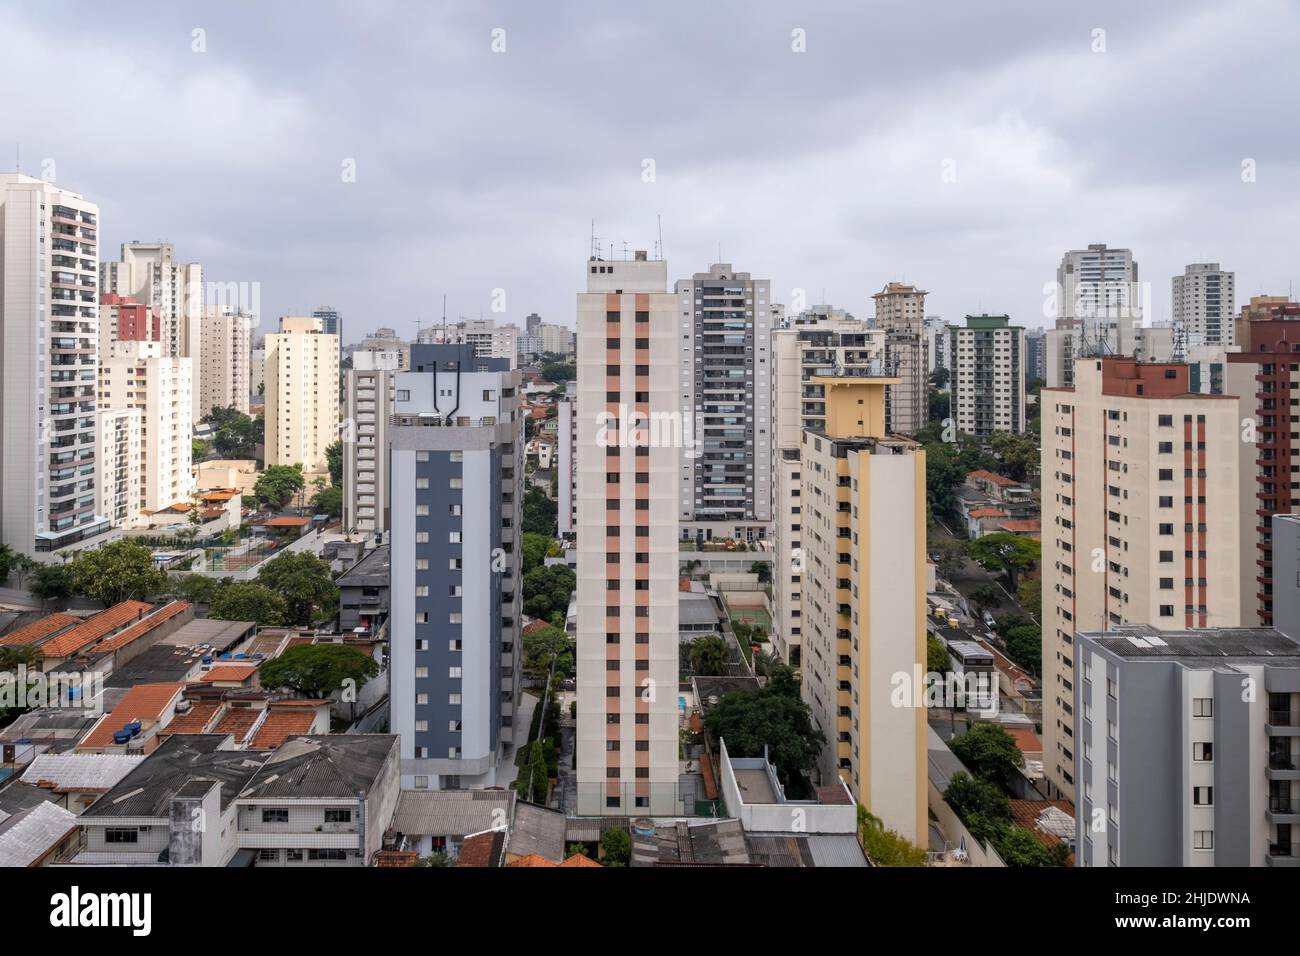 Apartment blocks in suburban São Paulo. Real estate with low rise traditional housing and tower block residences Stock Photo